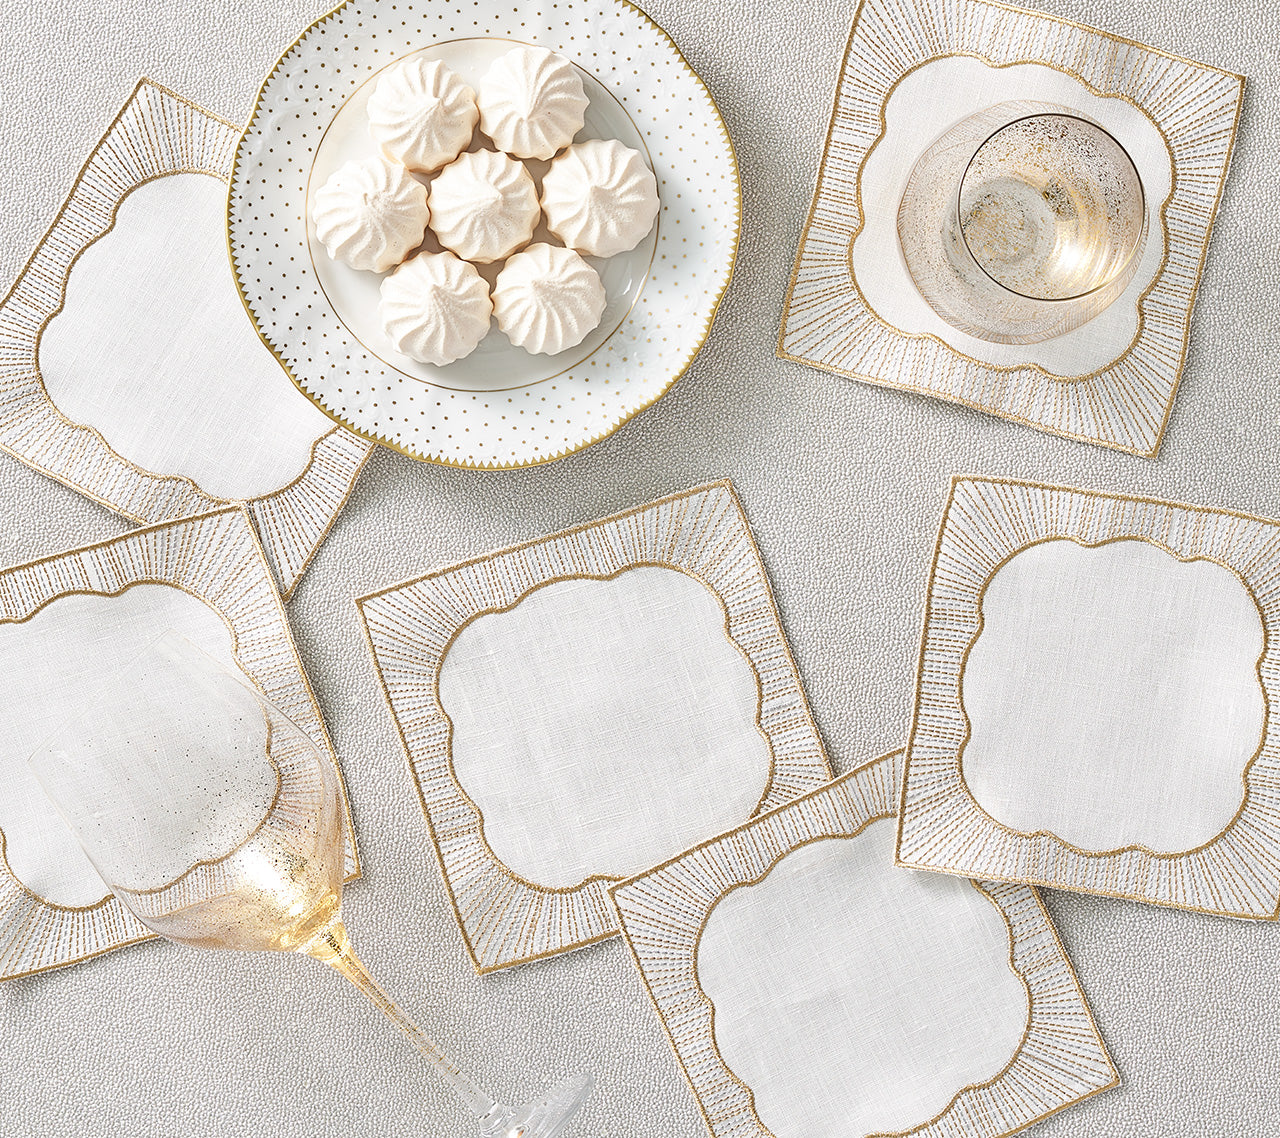 Frame Cocktail Napkins in White, Gold & Silver, Set of 6 in a Gift Box